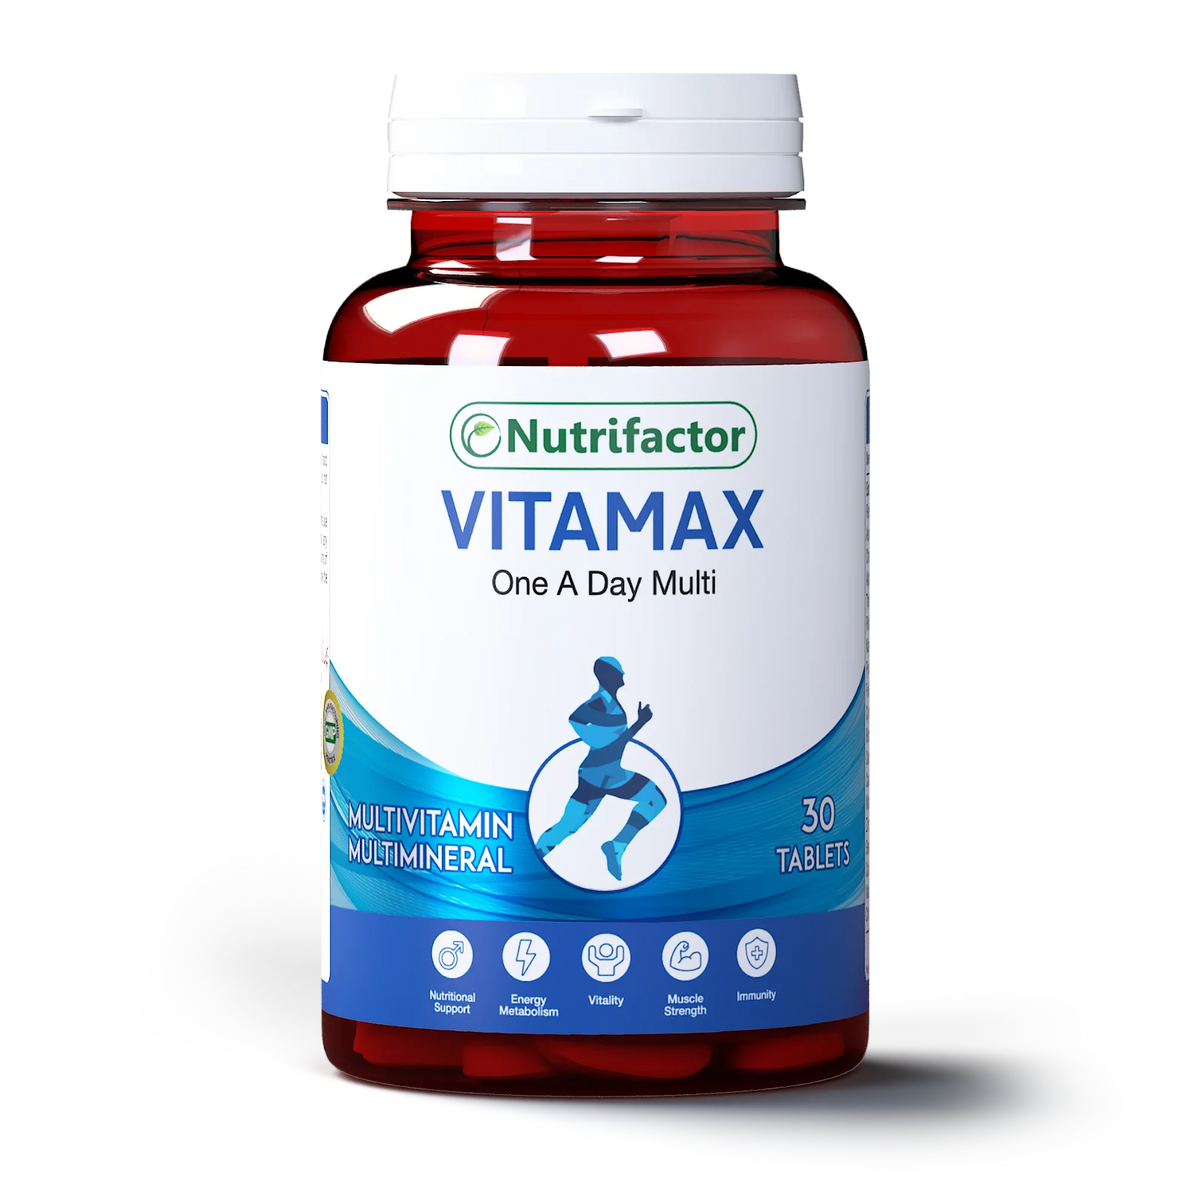 Nutrifactor Vitamax - Once A Day Multi Tablets 30s